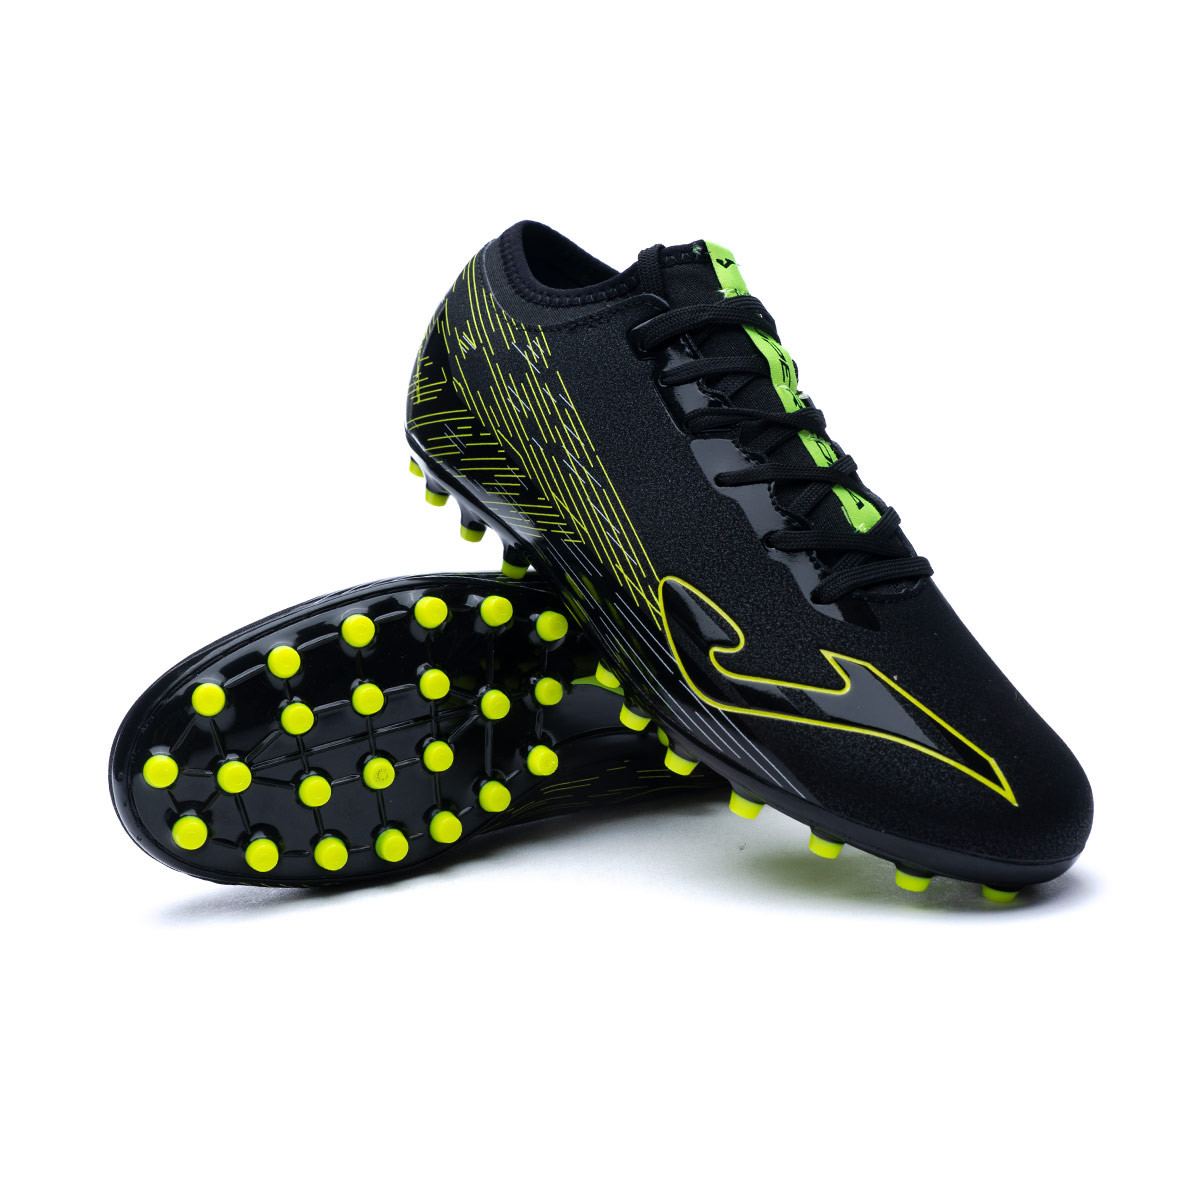 Football Boots Joma Super Copa AG Black-Yellow - Emotion